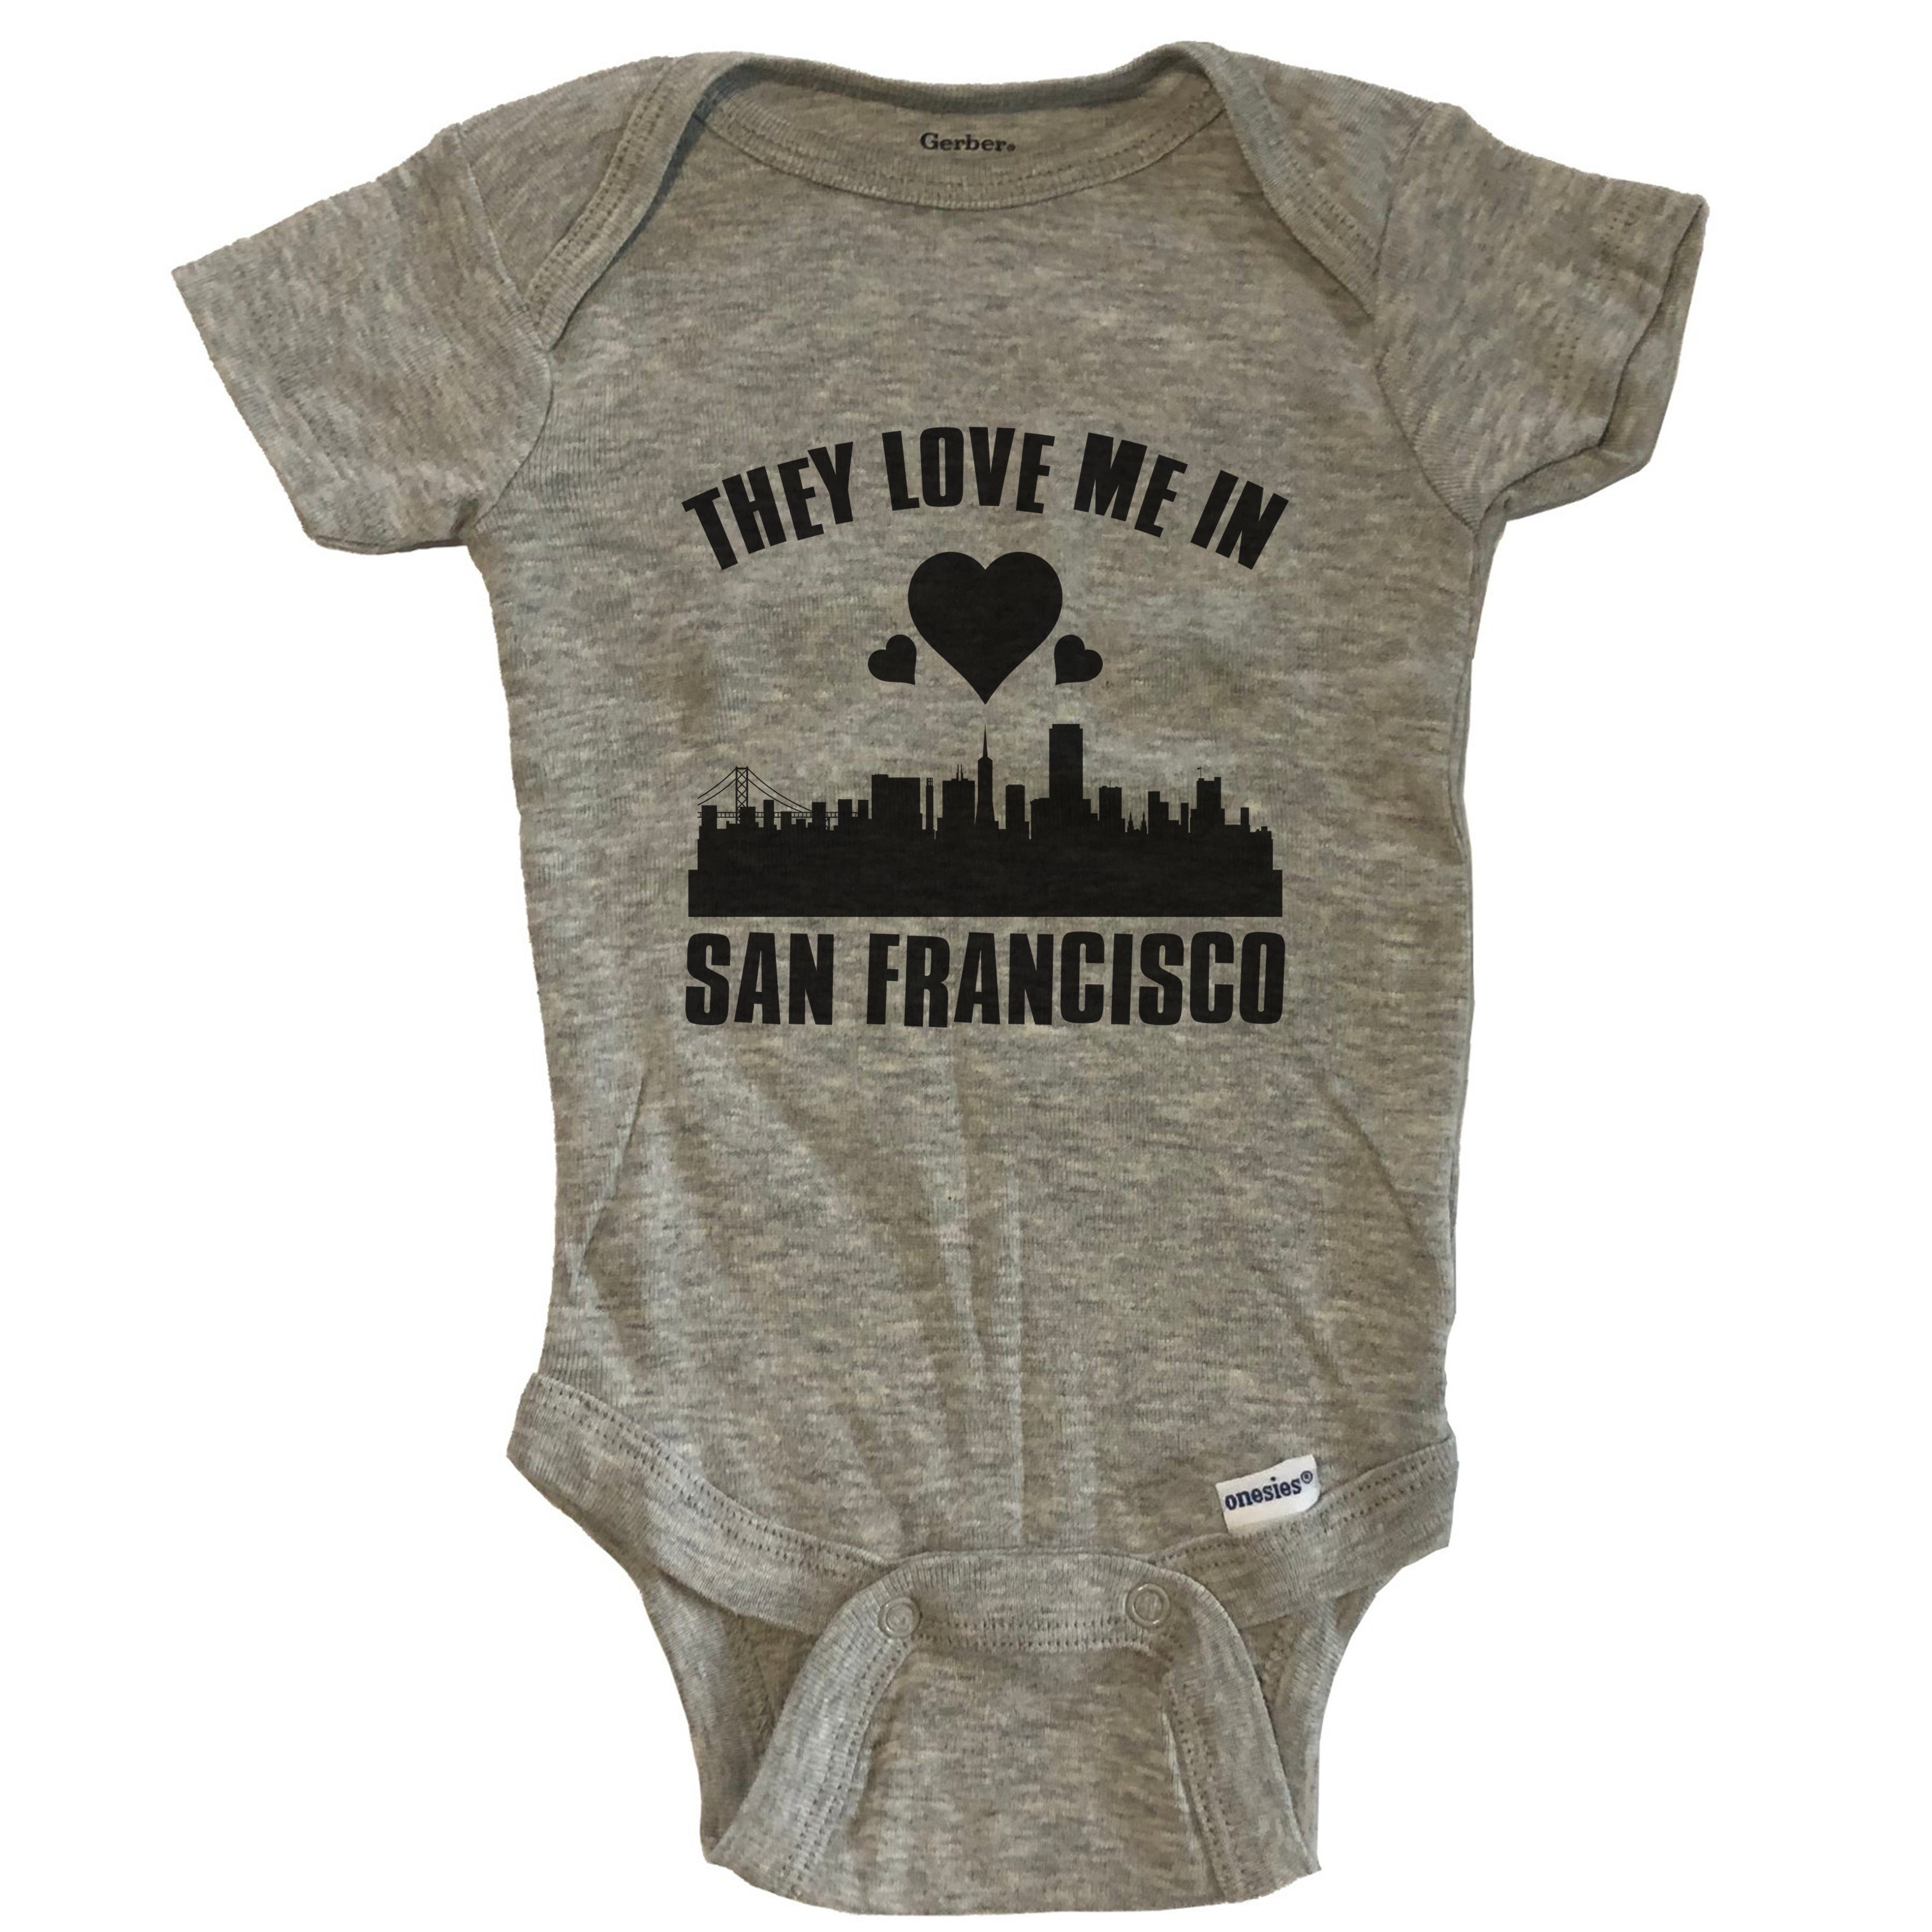 San Francisco Giants Baby Apparel, Baby Giants Clothing